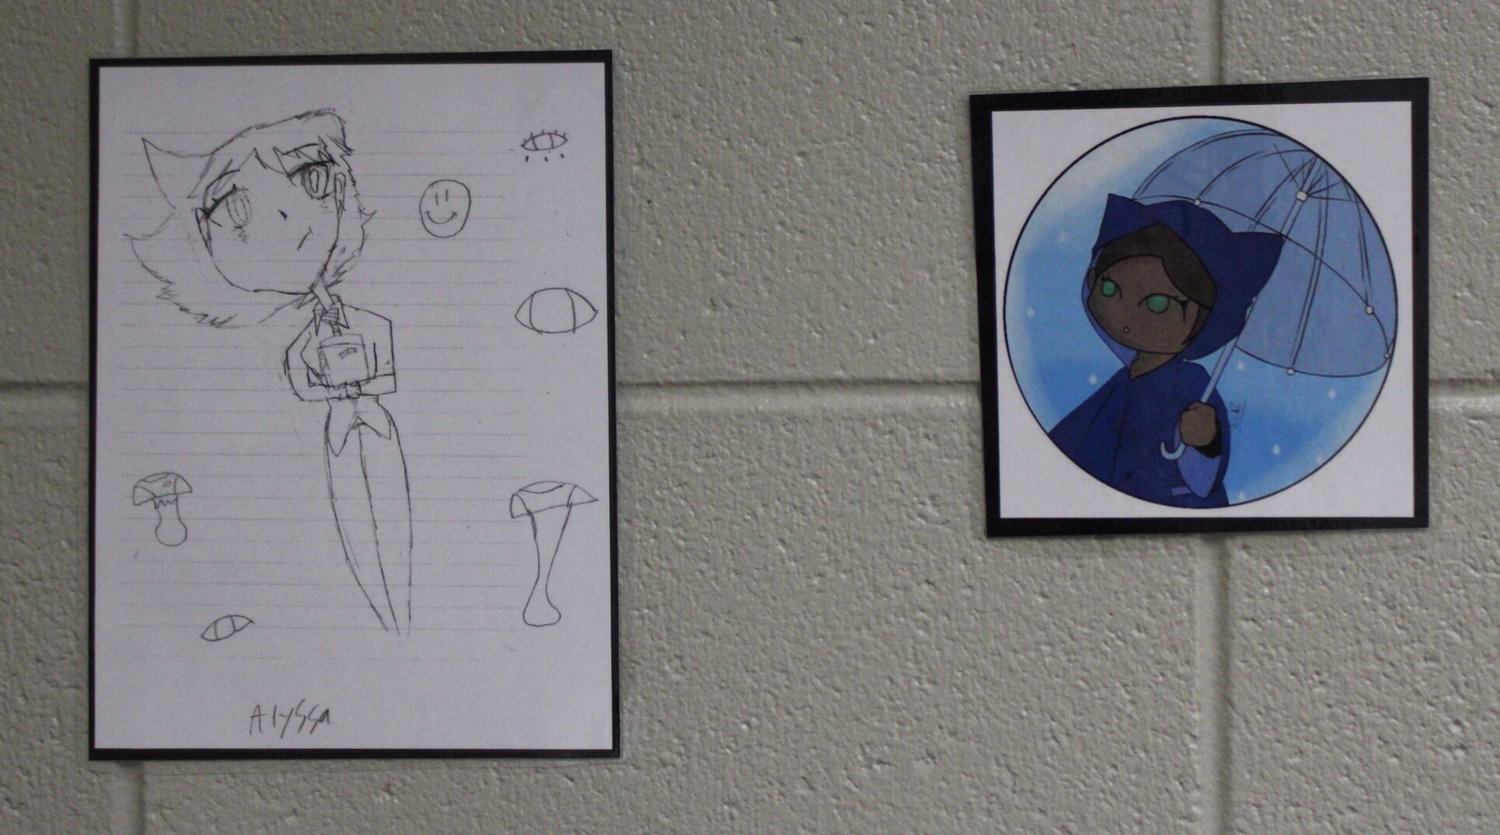 These pieces are by artists Alyssa and Sam